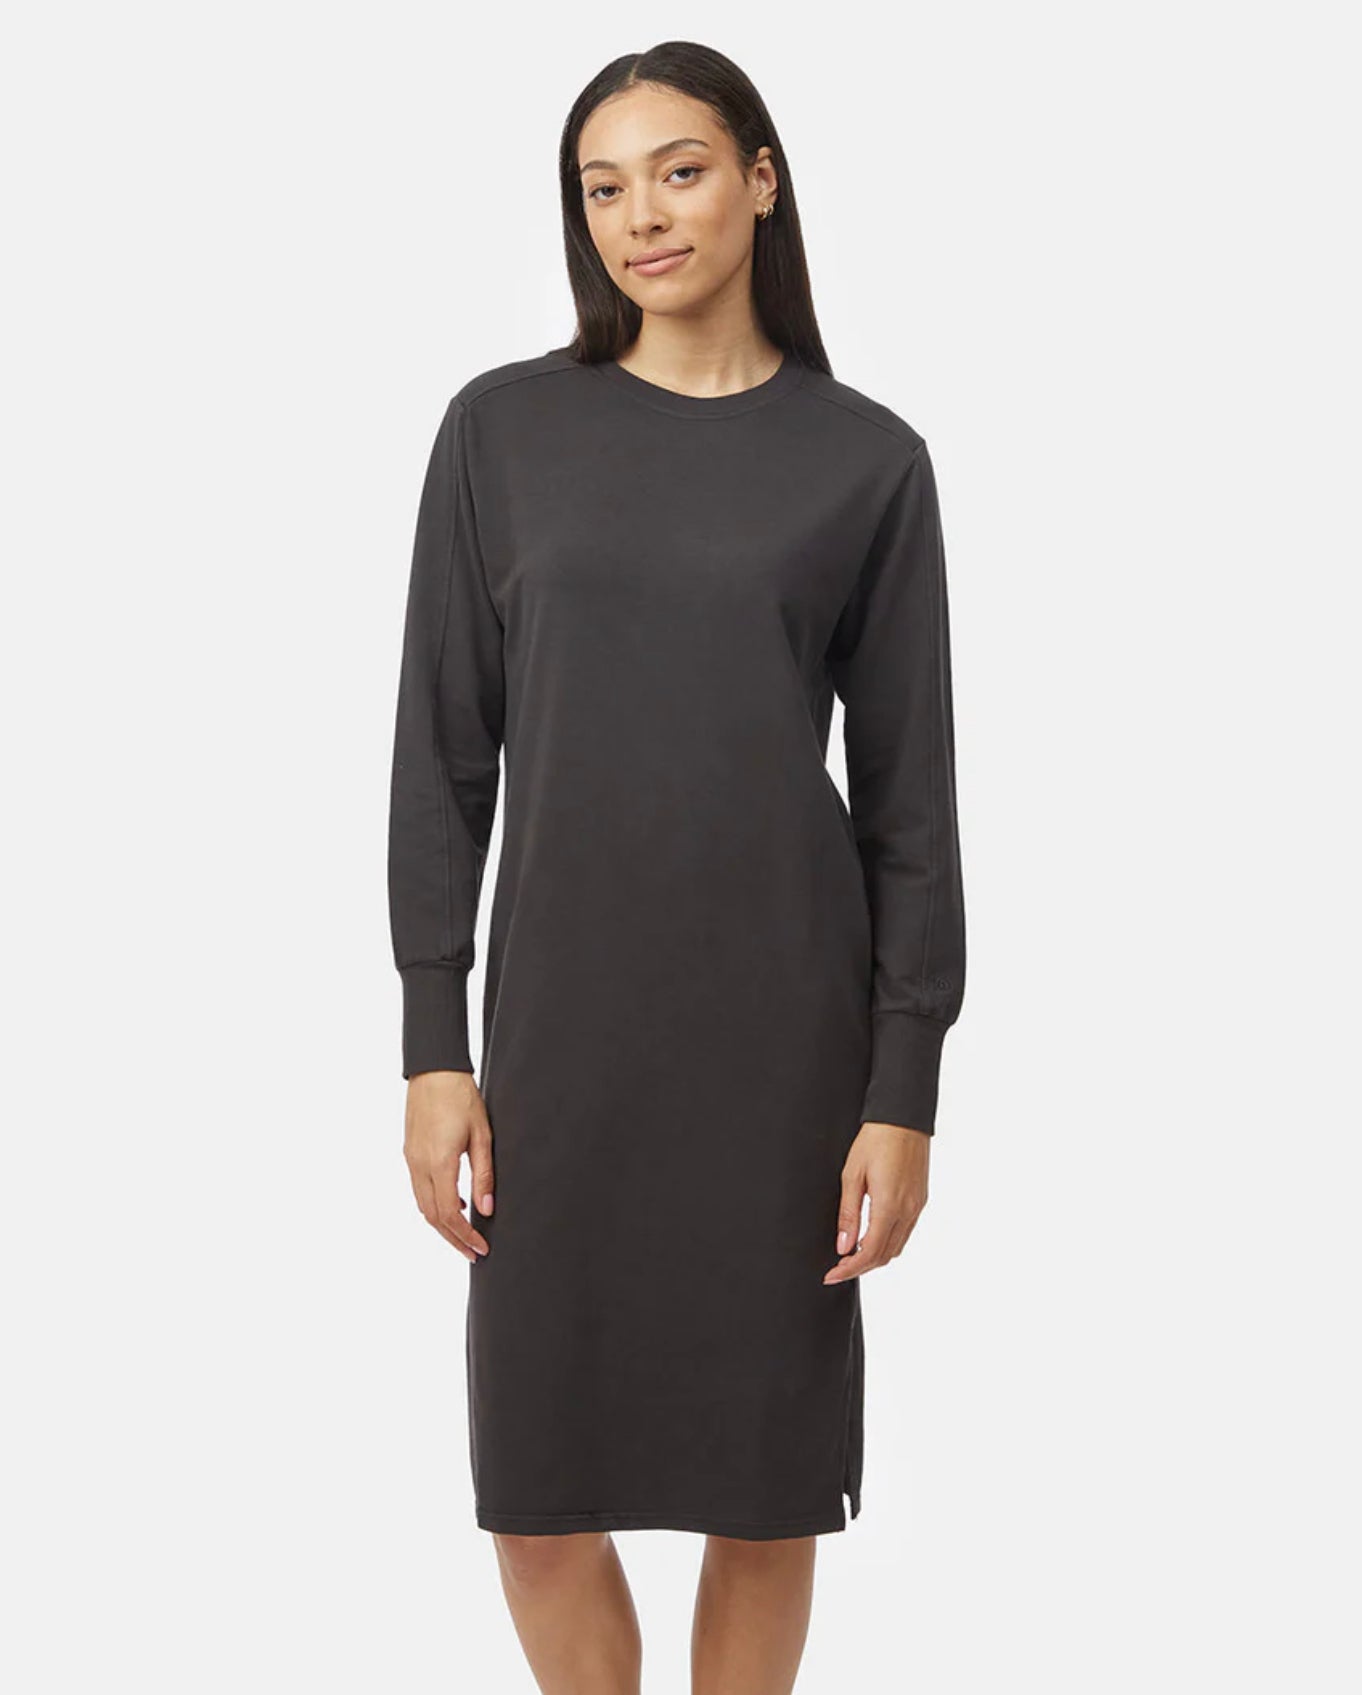 French Terry Long Sleeve Crew Dress